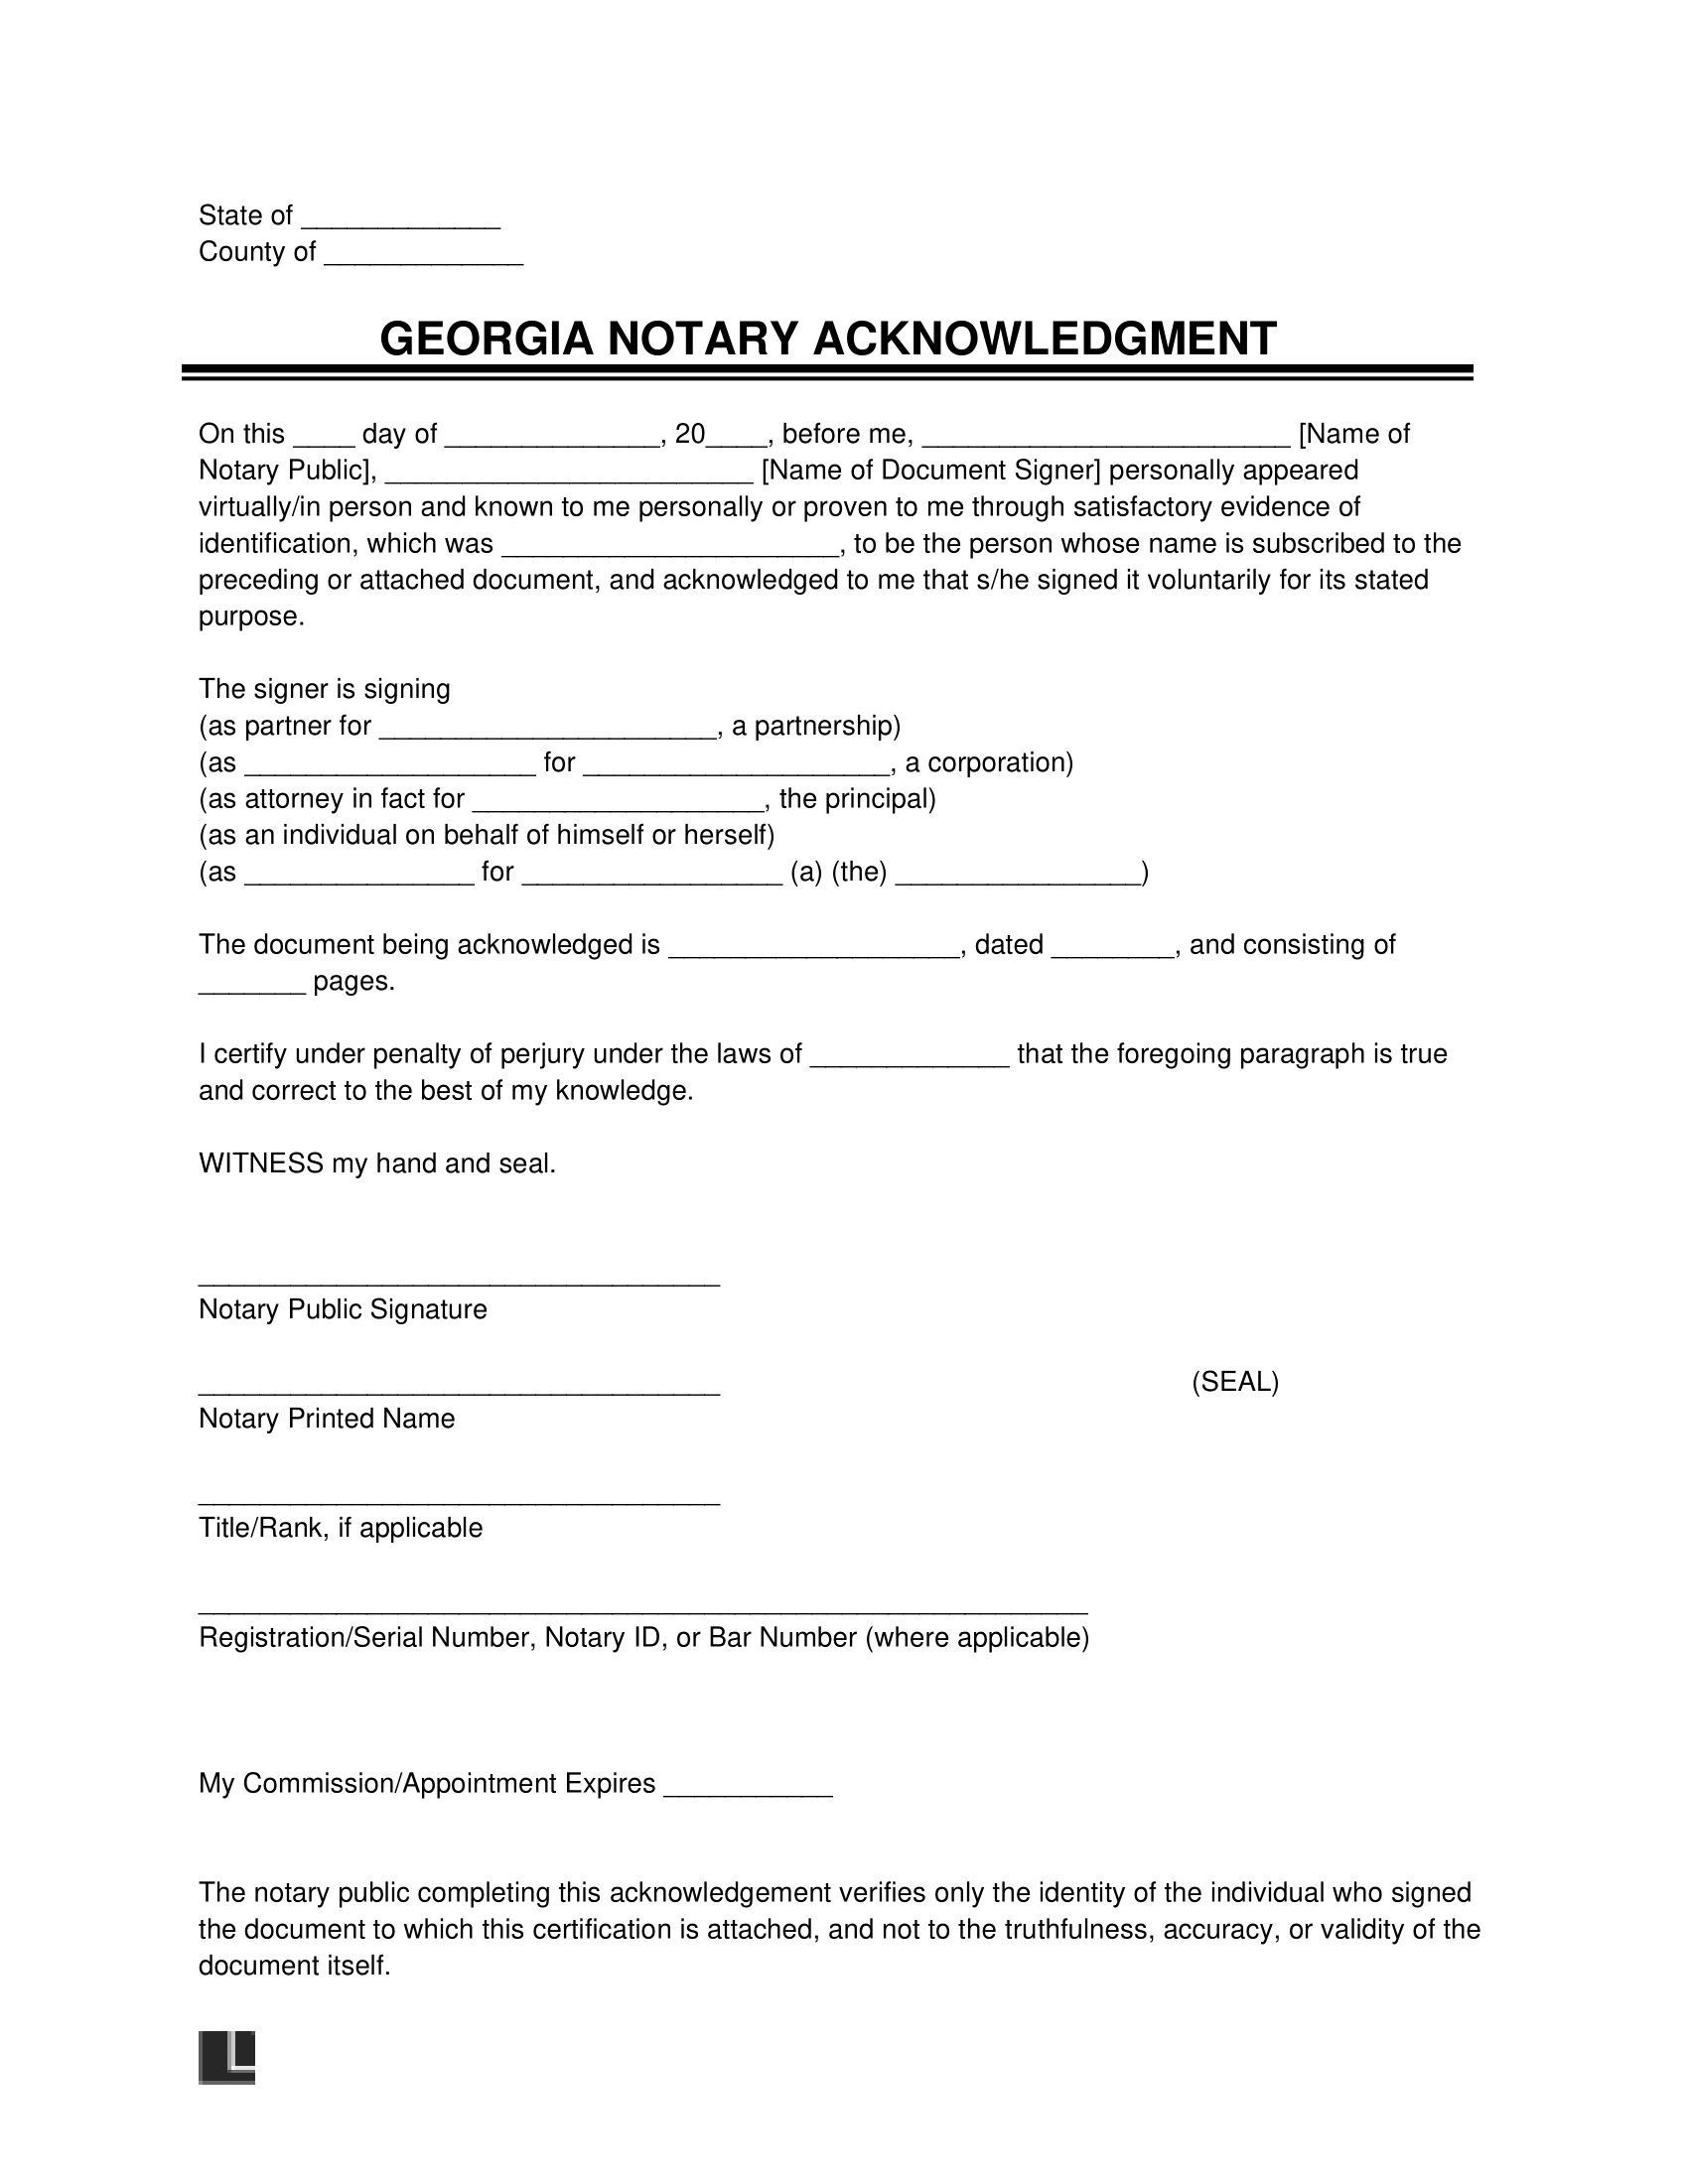 Georgia Notary Acknowledgment Form